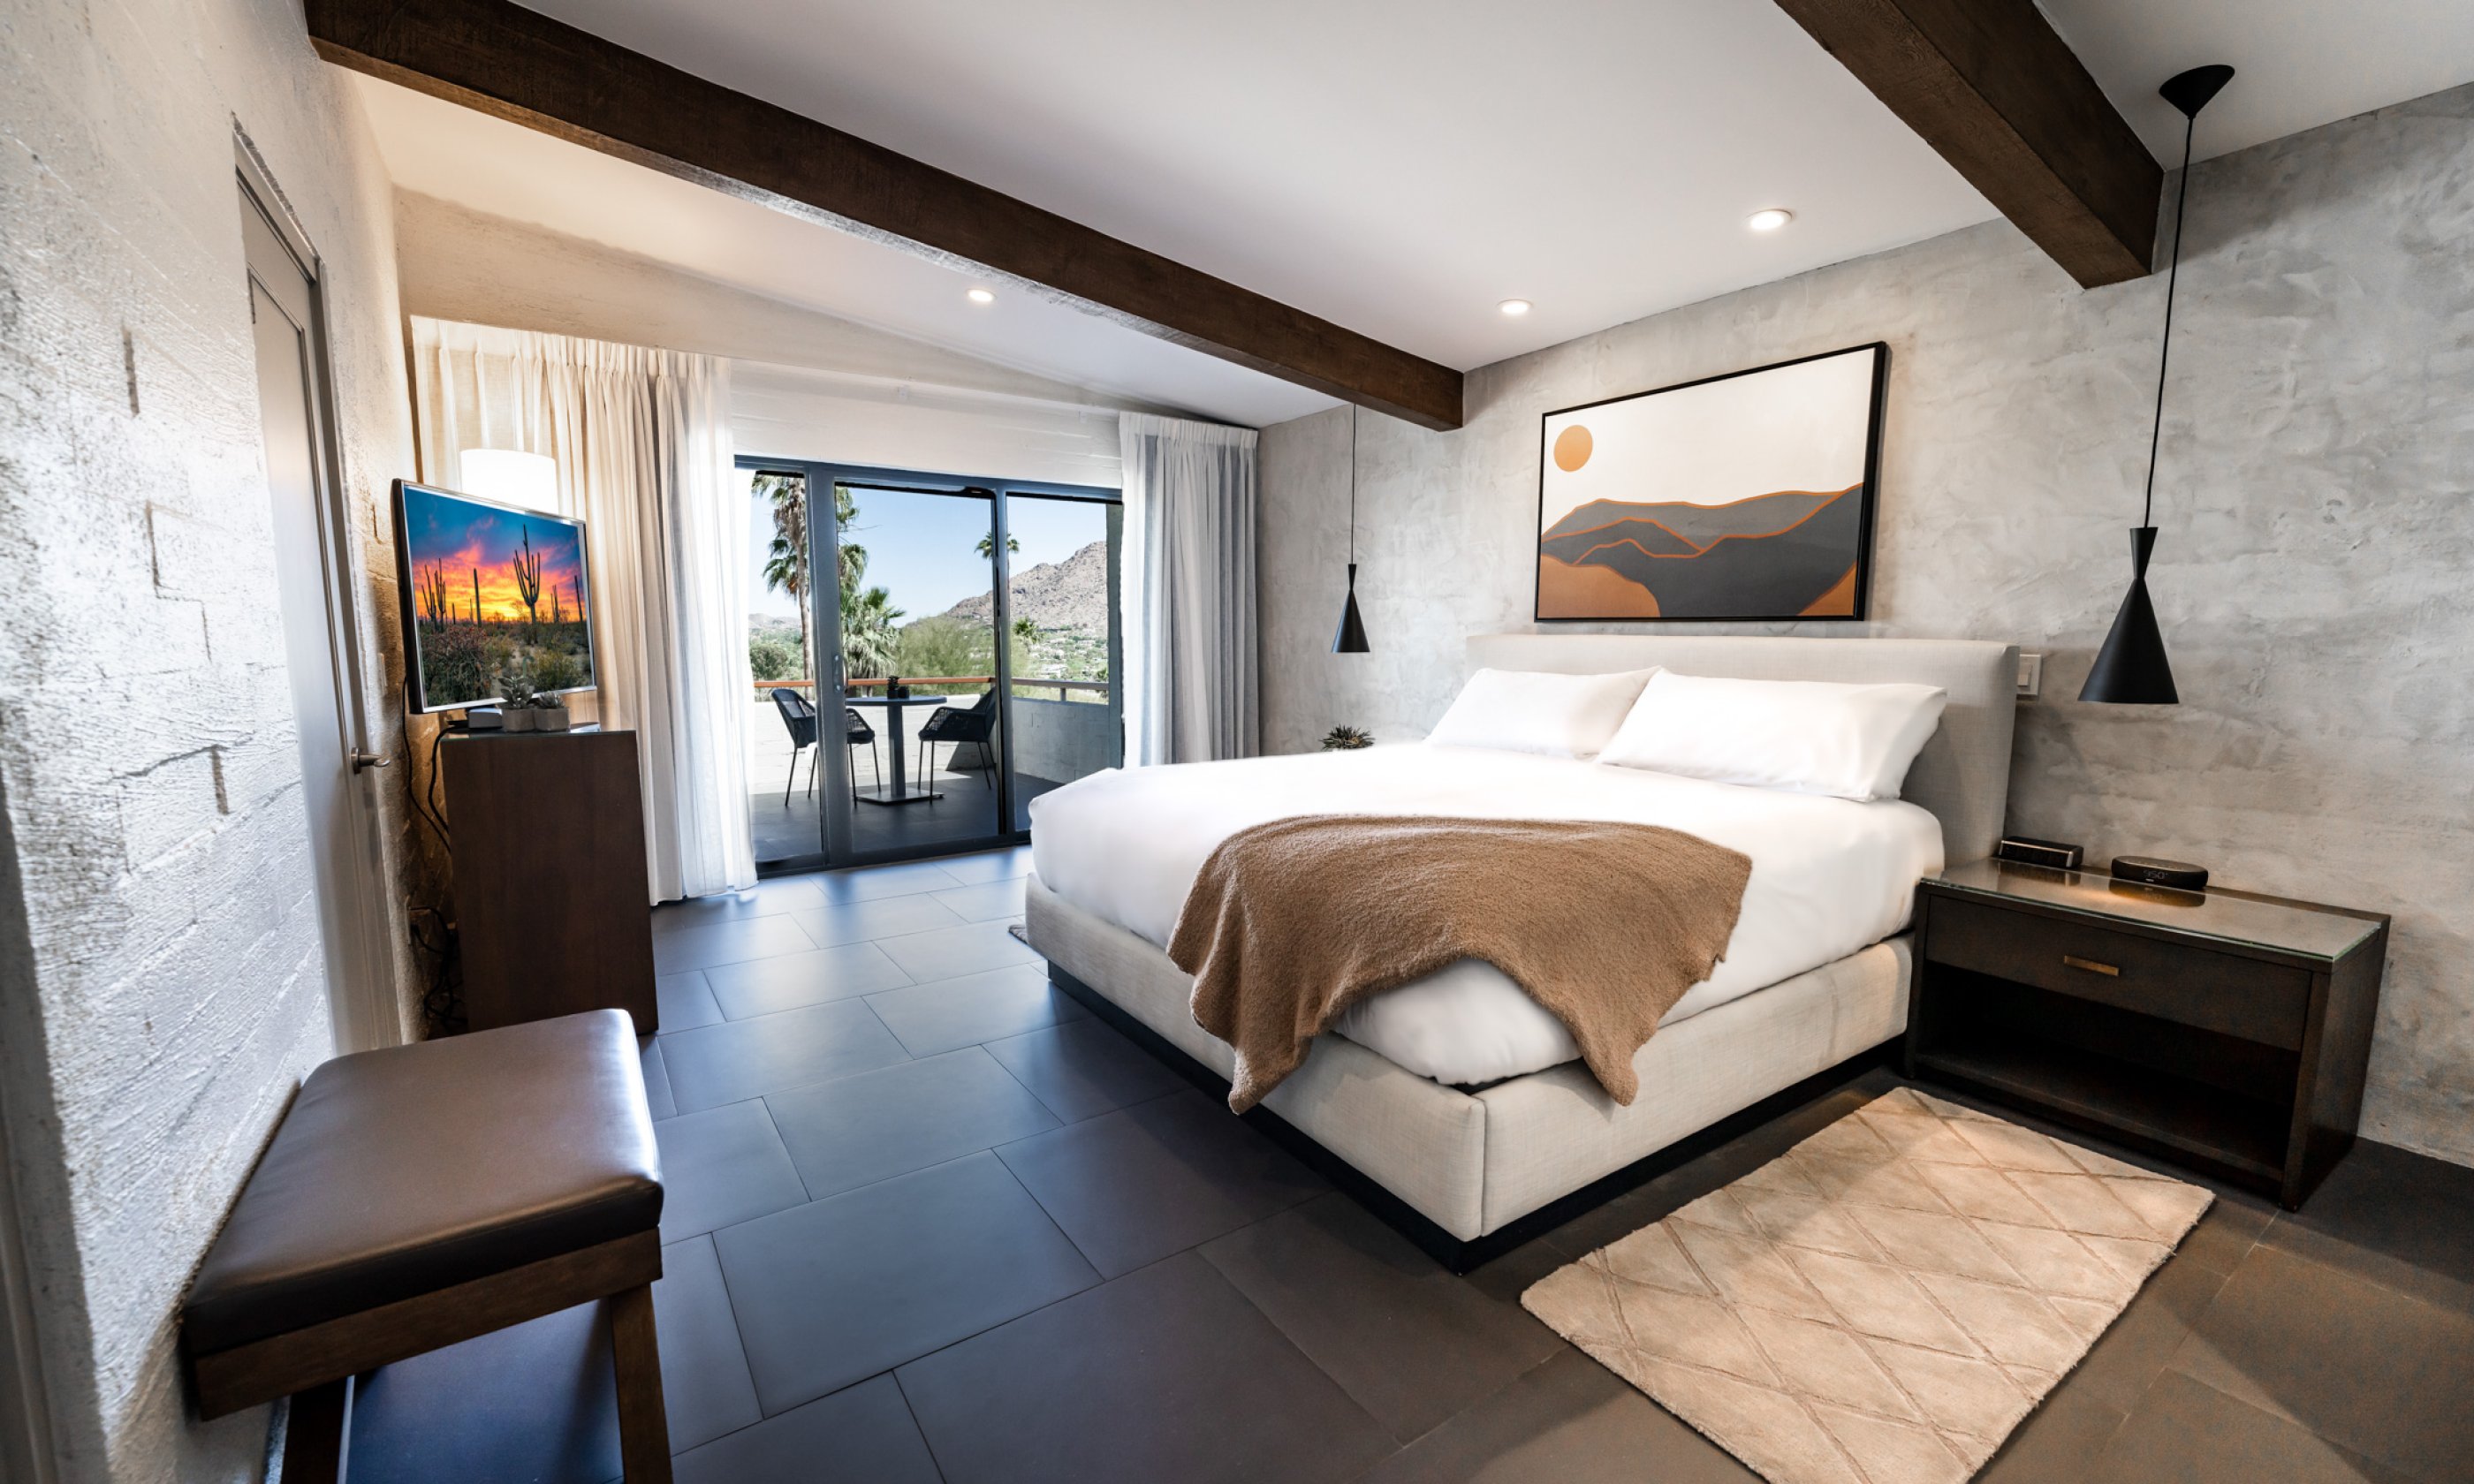 Suite bedroom with King bed, accent wall with art, nightstand with light, flatscreen television, dresser and wrap around patio.